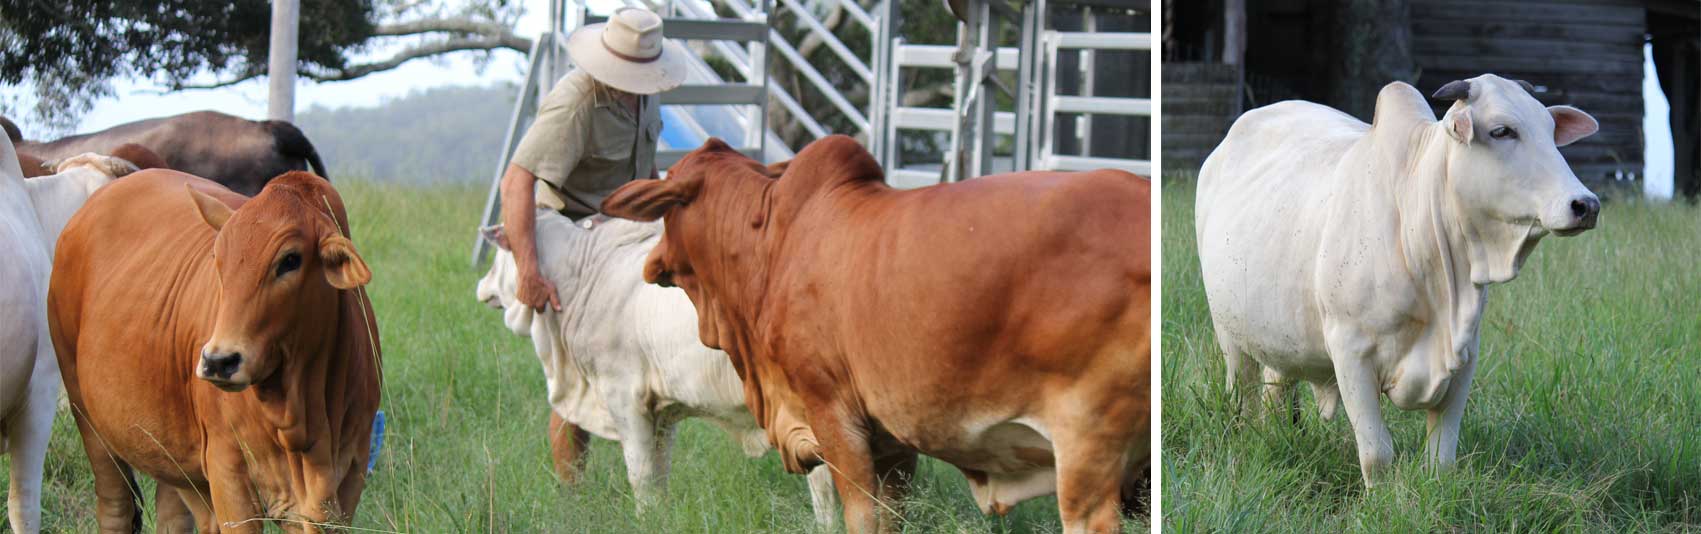 Boran cattle. From left to right – Boran cattle interacting with owner; white, horned Boran